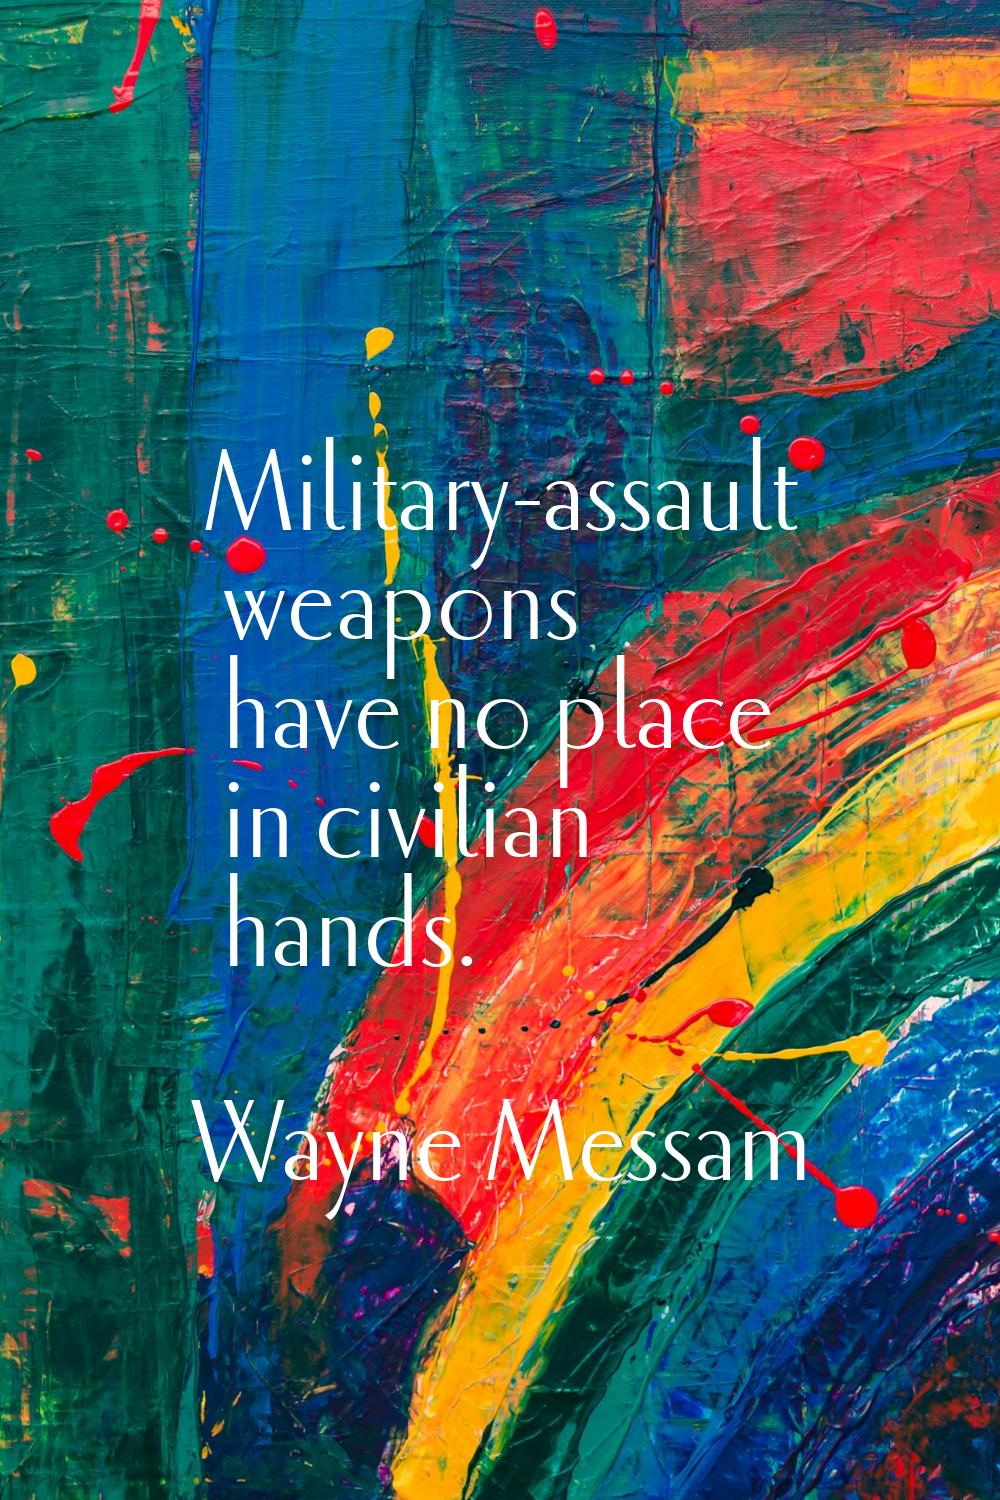 Military-assault weapons have no place in civilian hands.